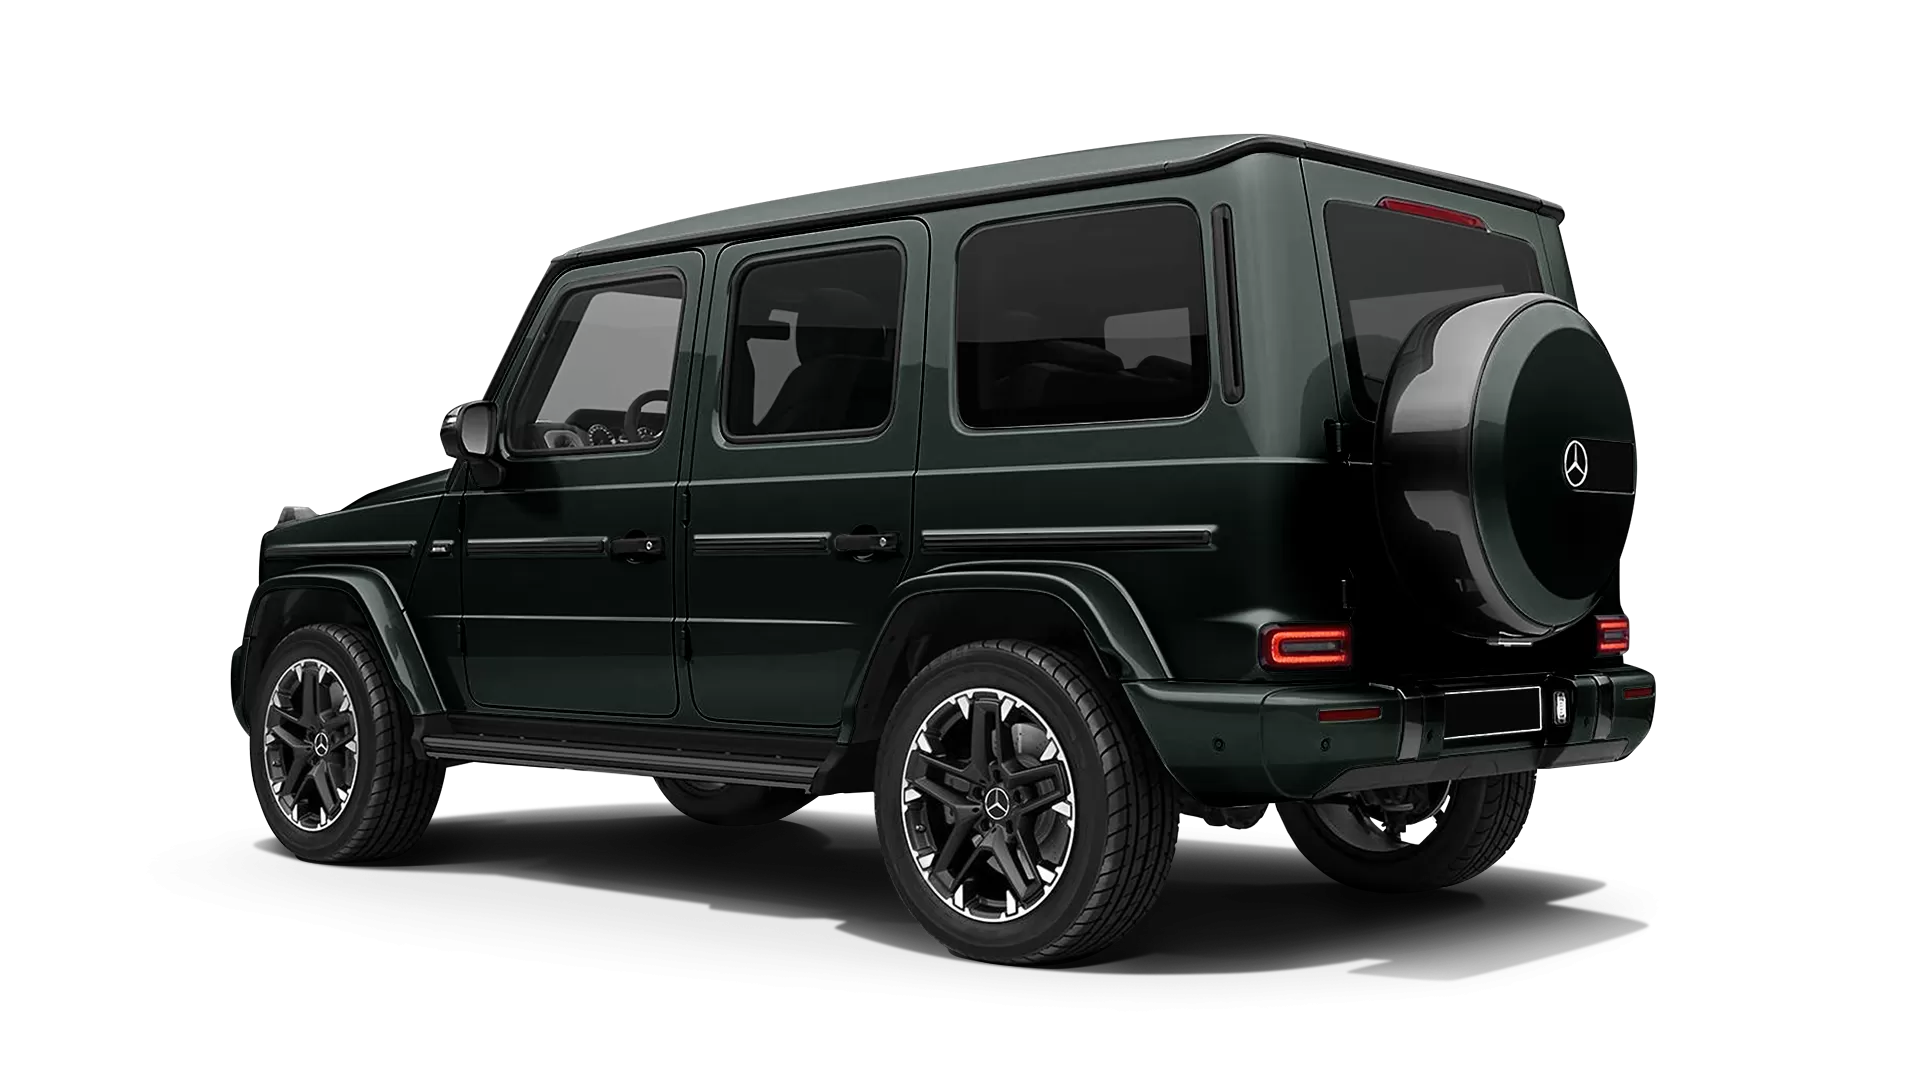 Mercedes G class W463 stock rear view in Dark Green color